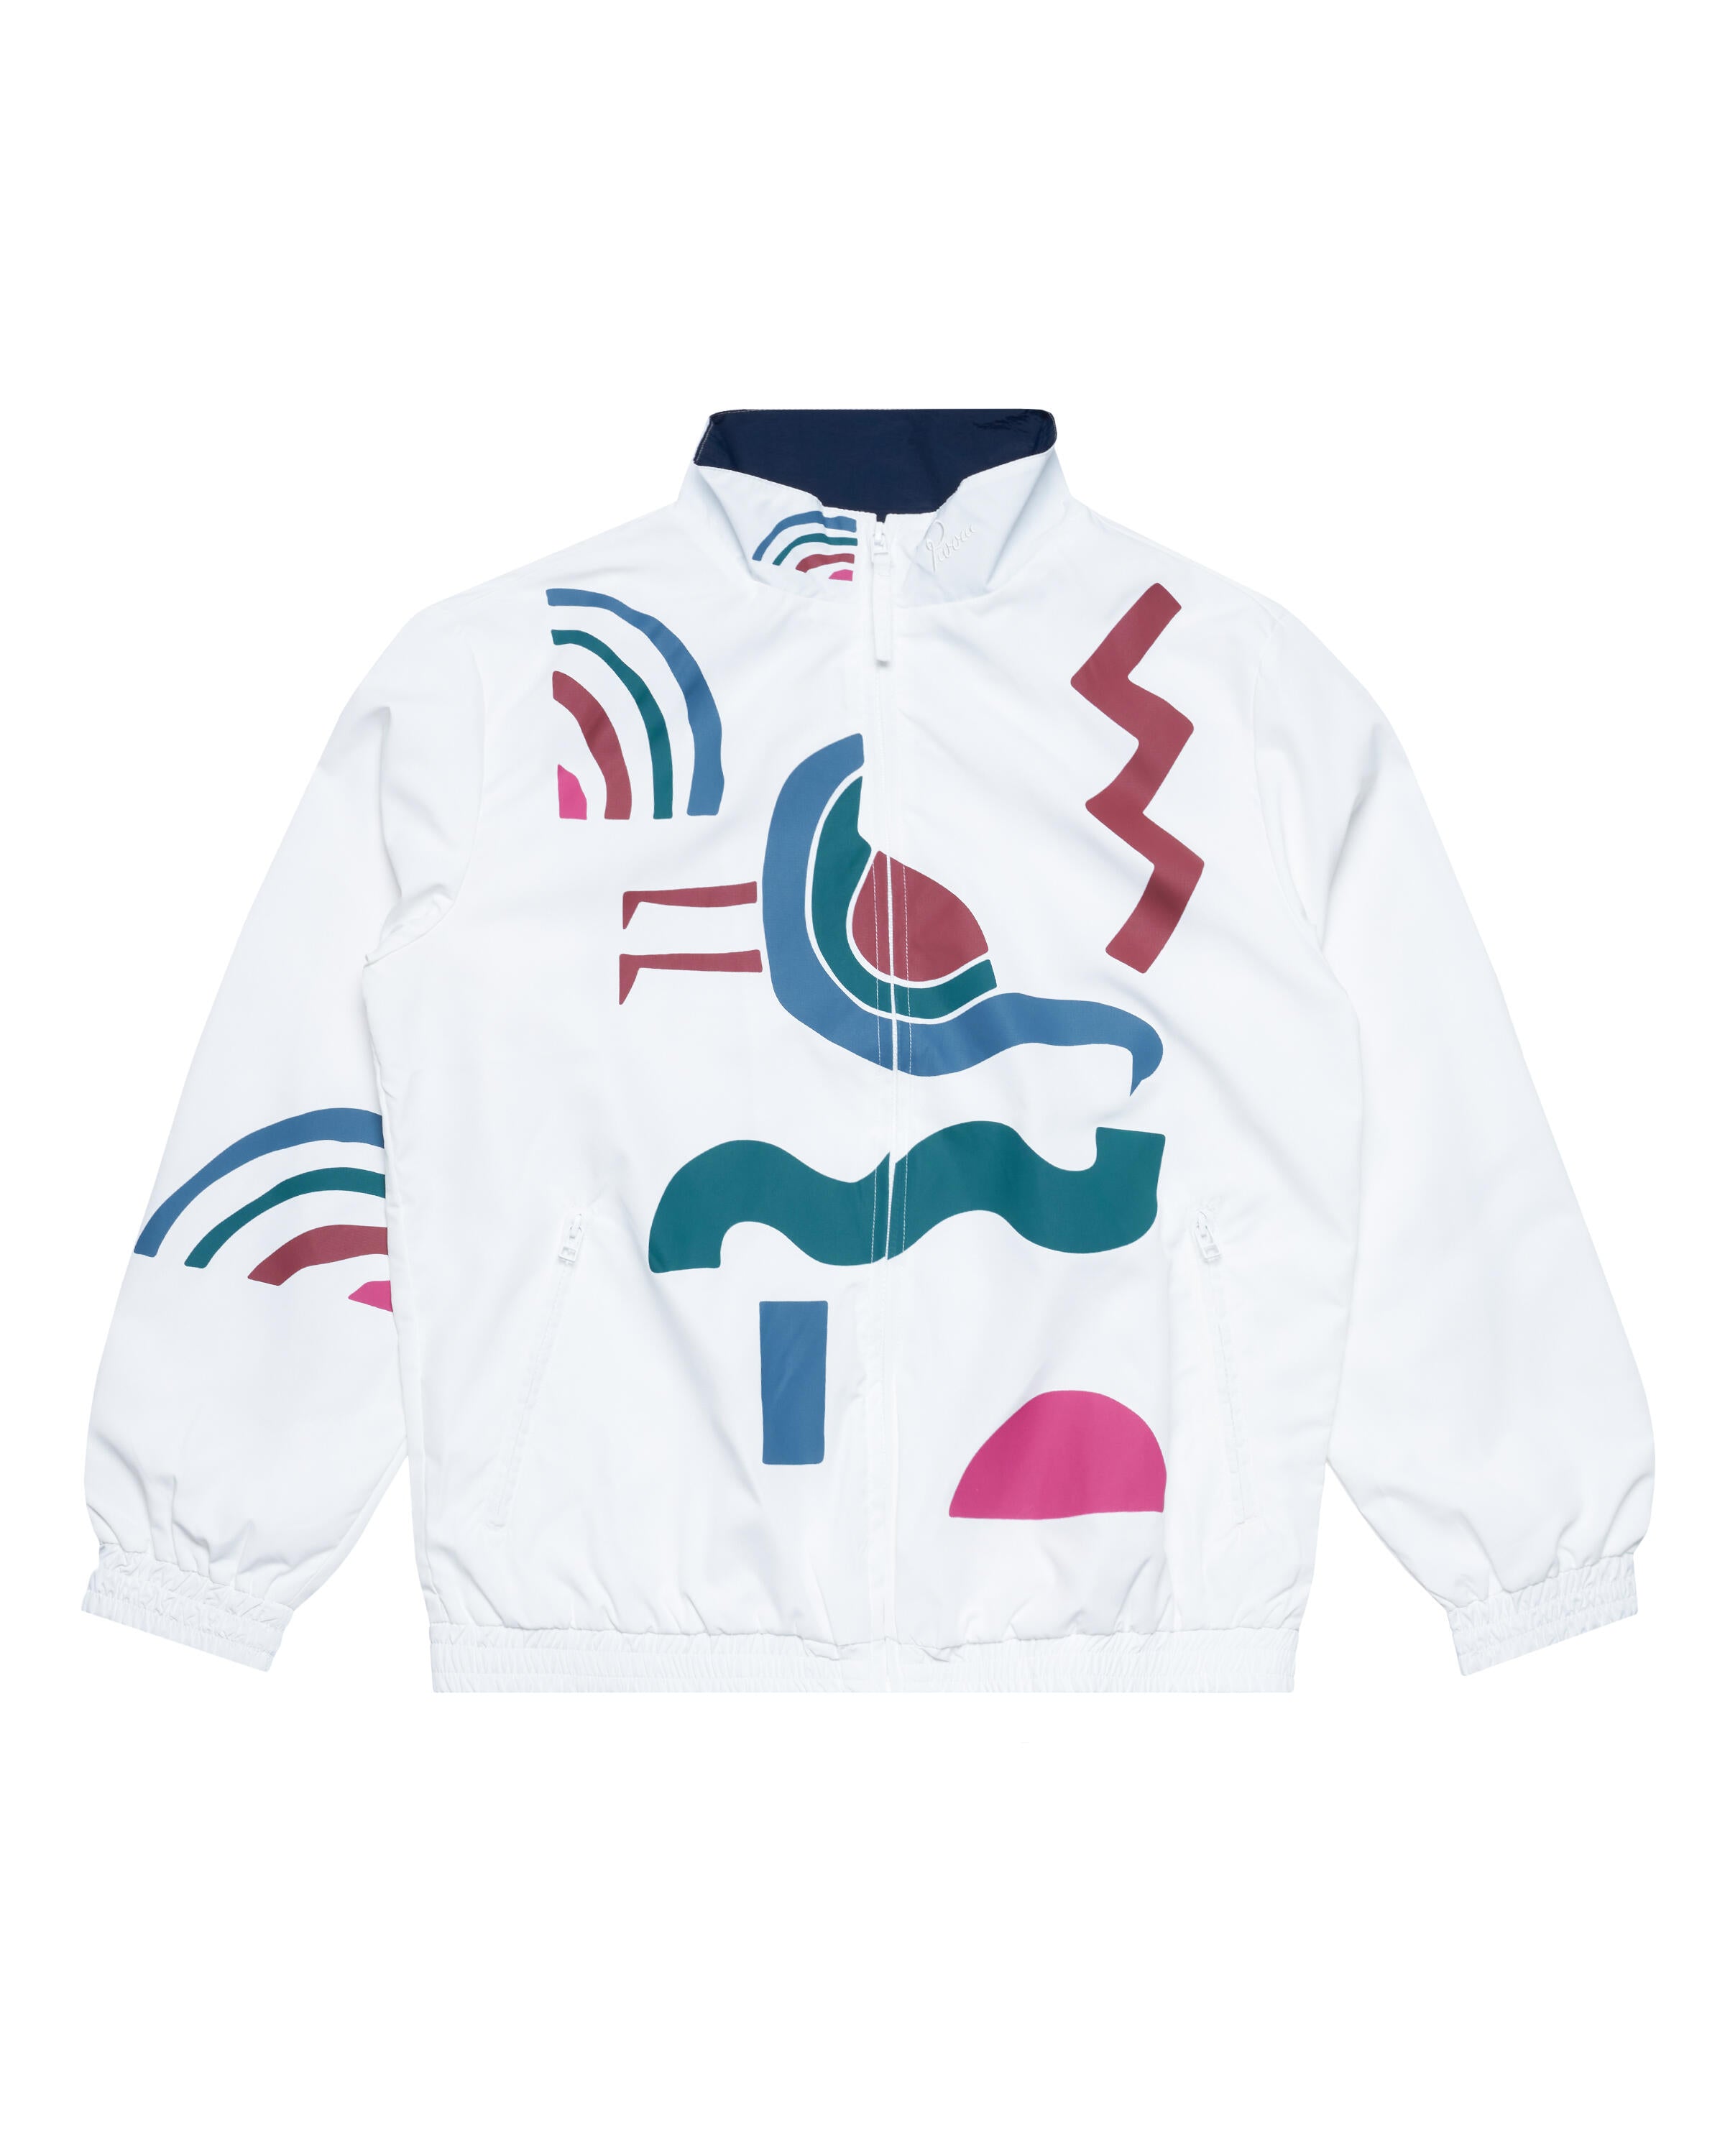 by Parra tennis maybe? track jacket